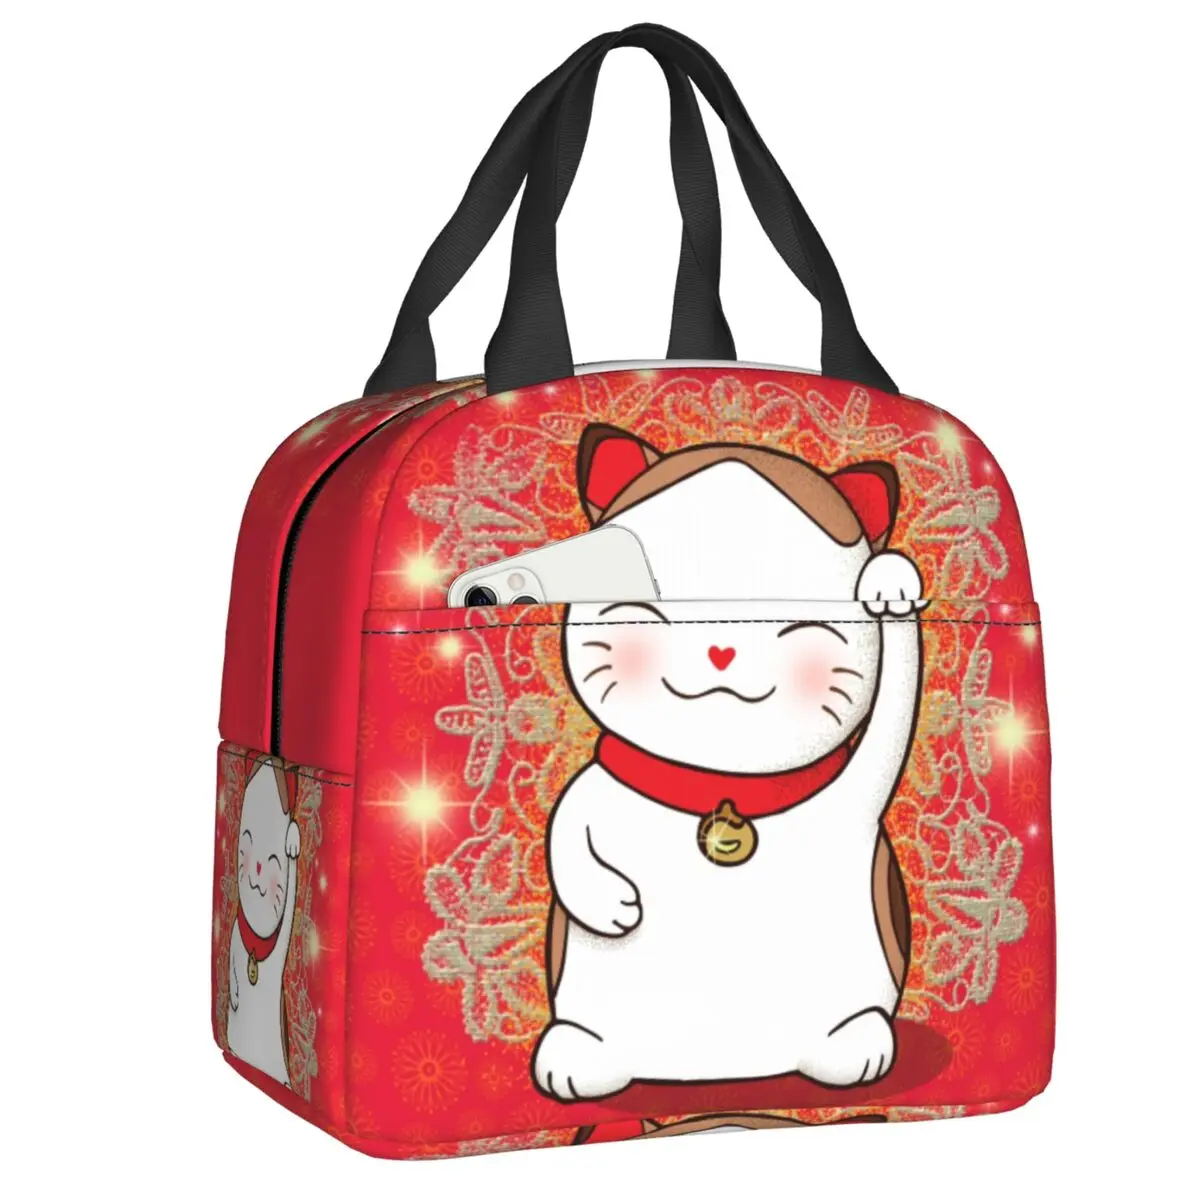 

Cute Maneki Neko Waving Insulated Lunch Tote Bag for Women Japanese Lucky Cat Resuable Thermal Cooler Bento Box Camping Travel